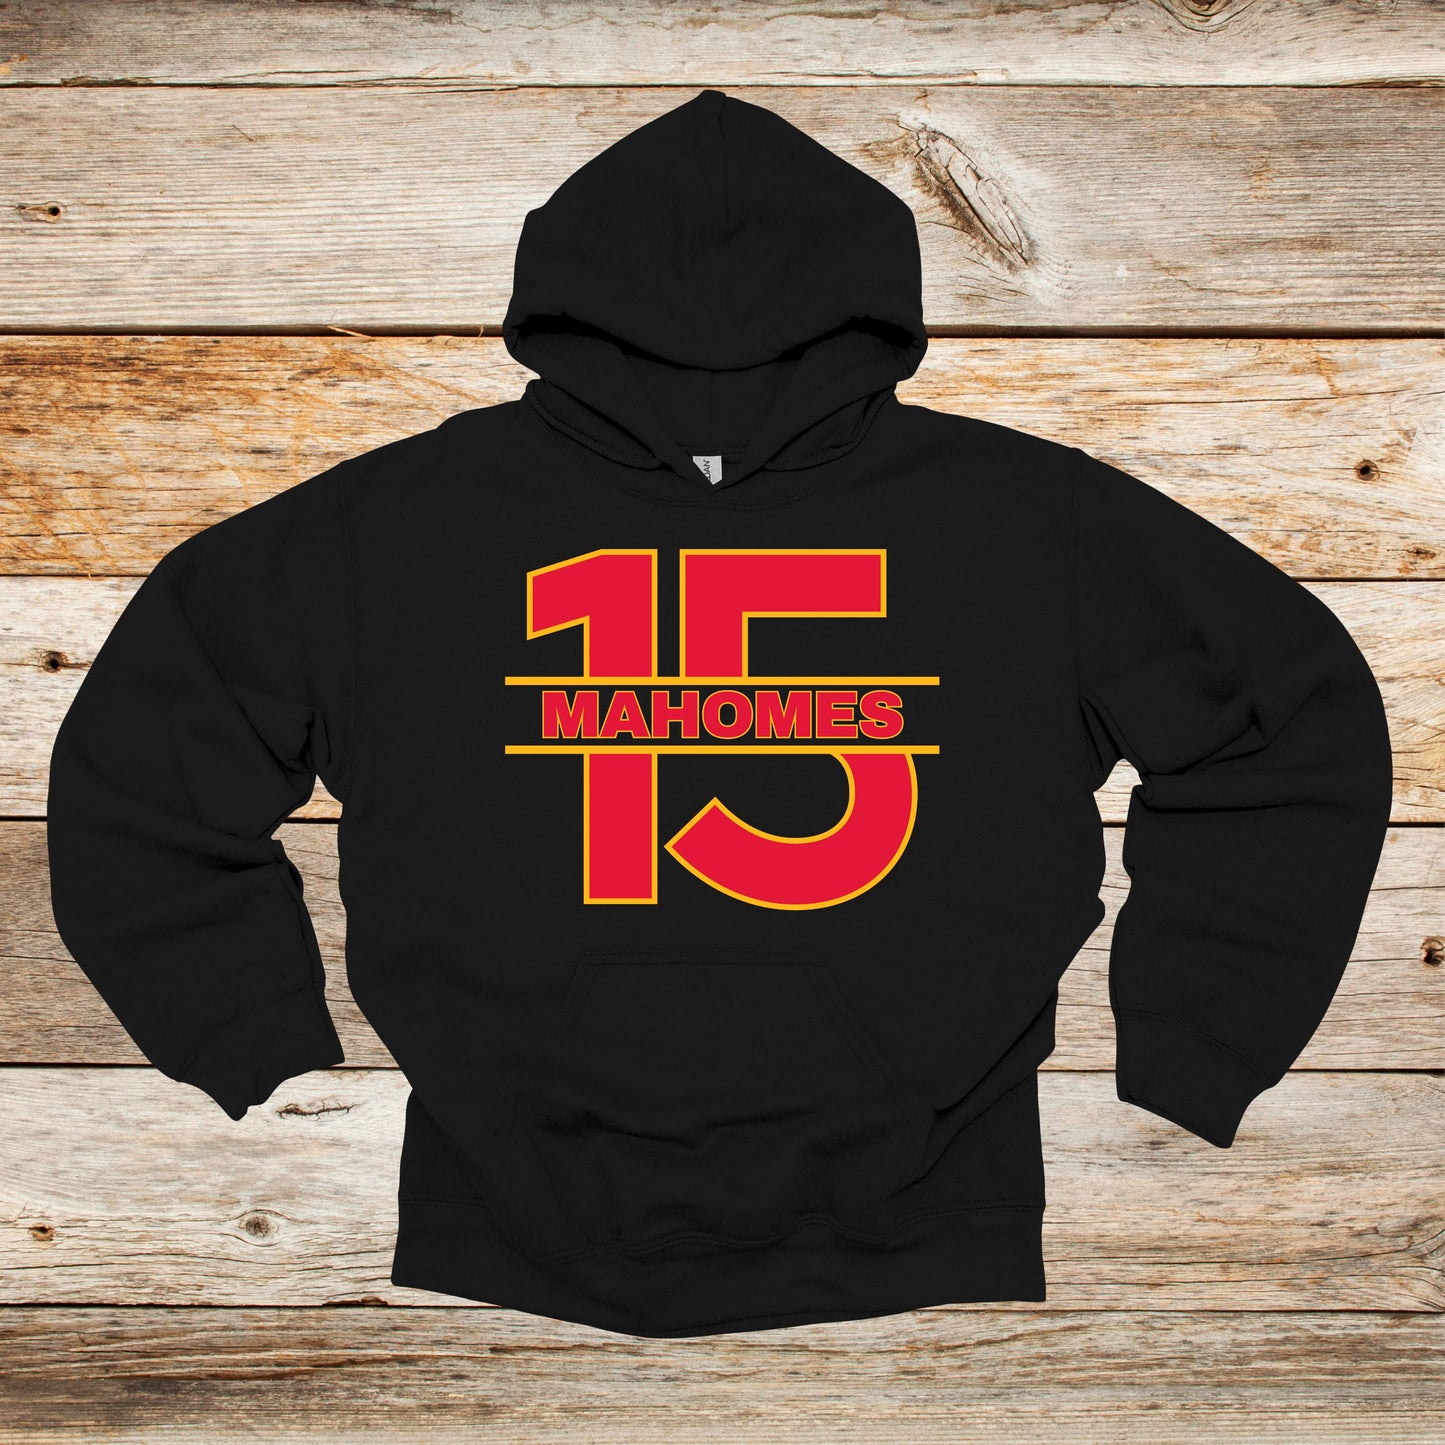 Football Crewneck and Hooded Sweatshirt - Chiefs Football - 15 Mahomes - Adult and Children's Tee Shirts - Sports Hooded Sweatshirt Graphic Avenue Hooded Sweatshirt Black Adult Small